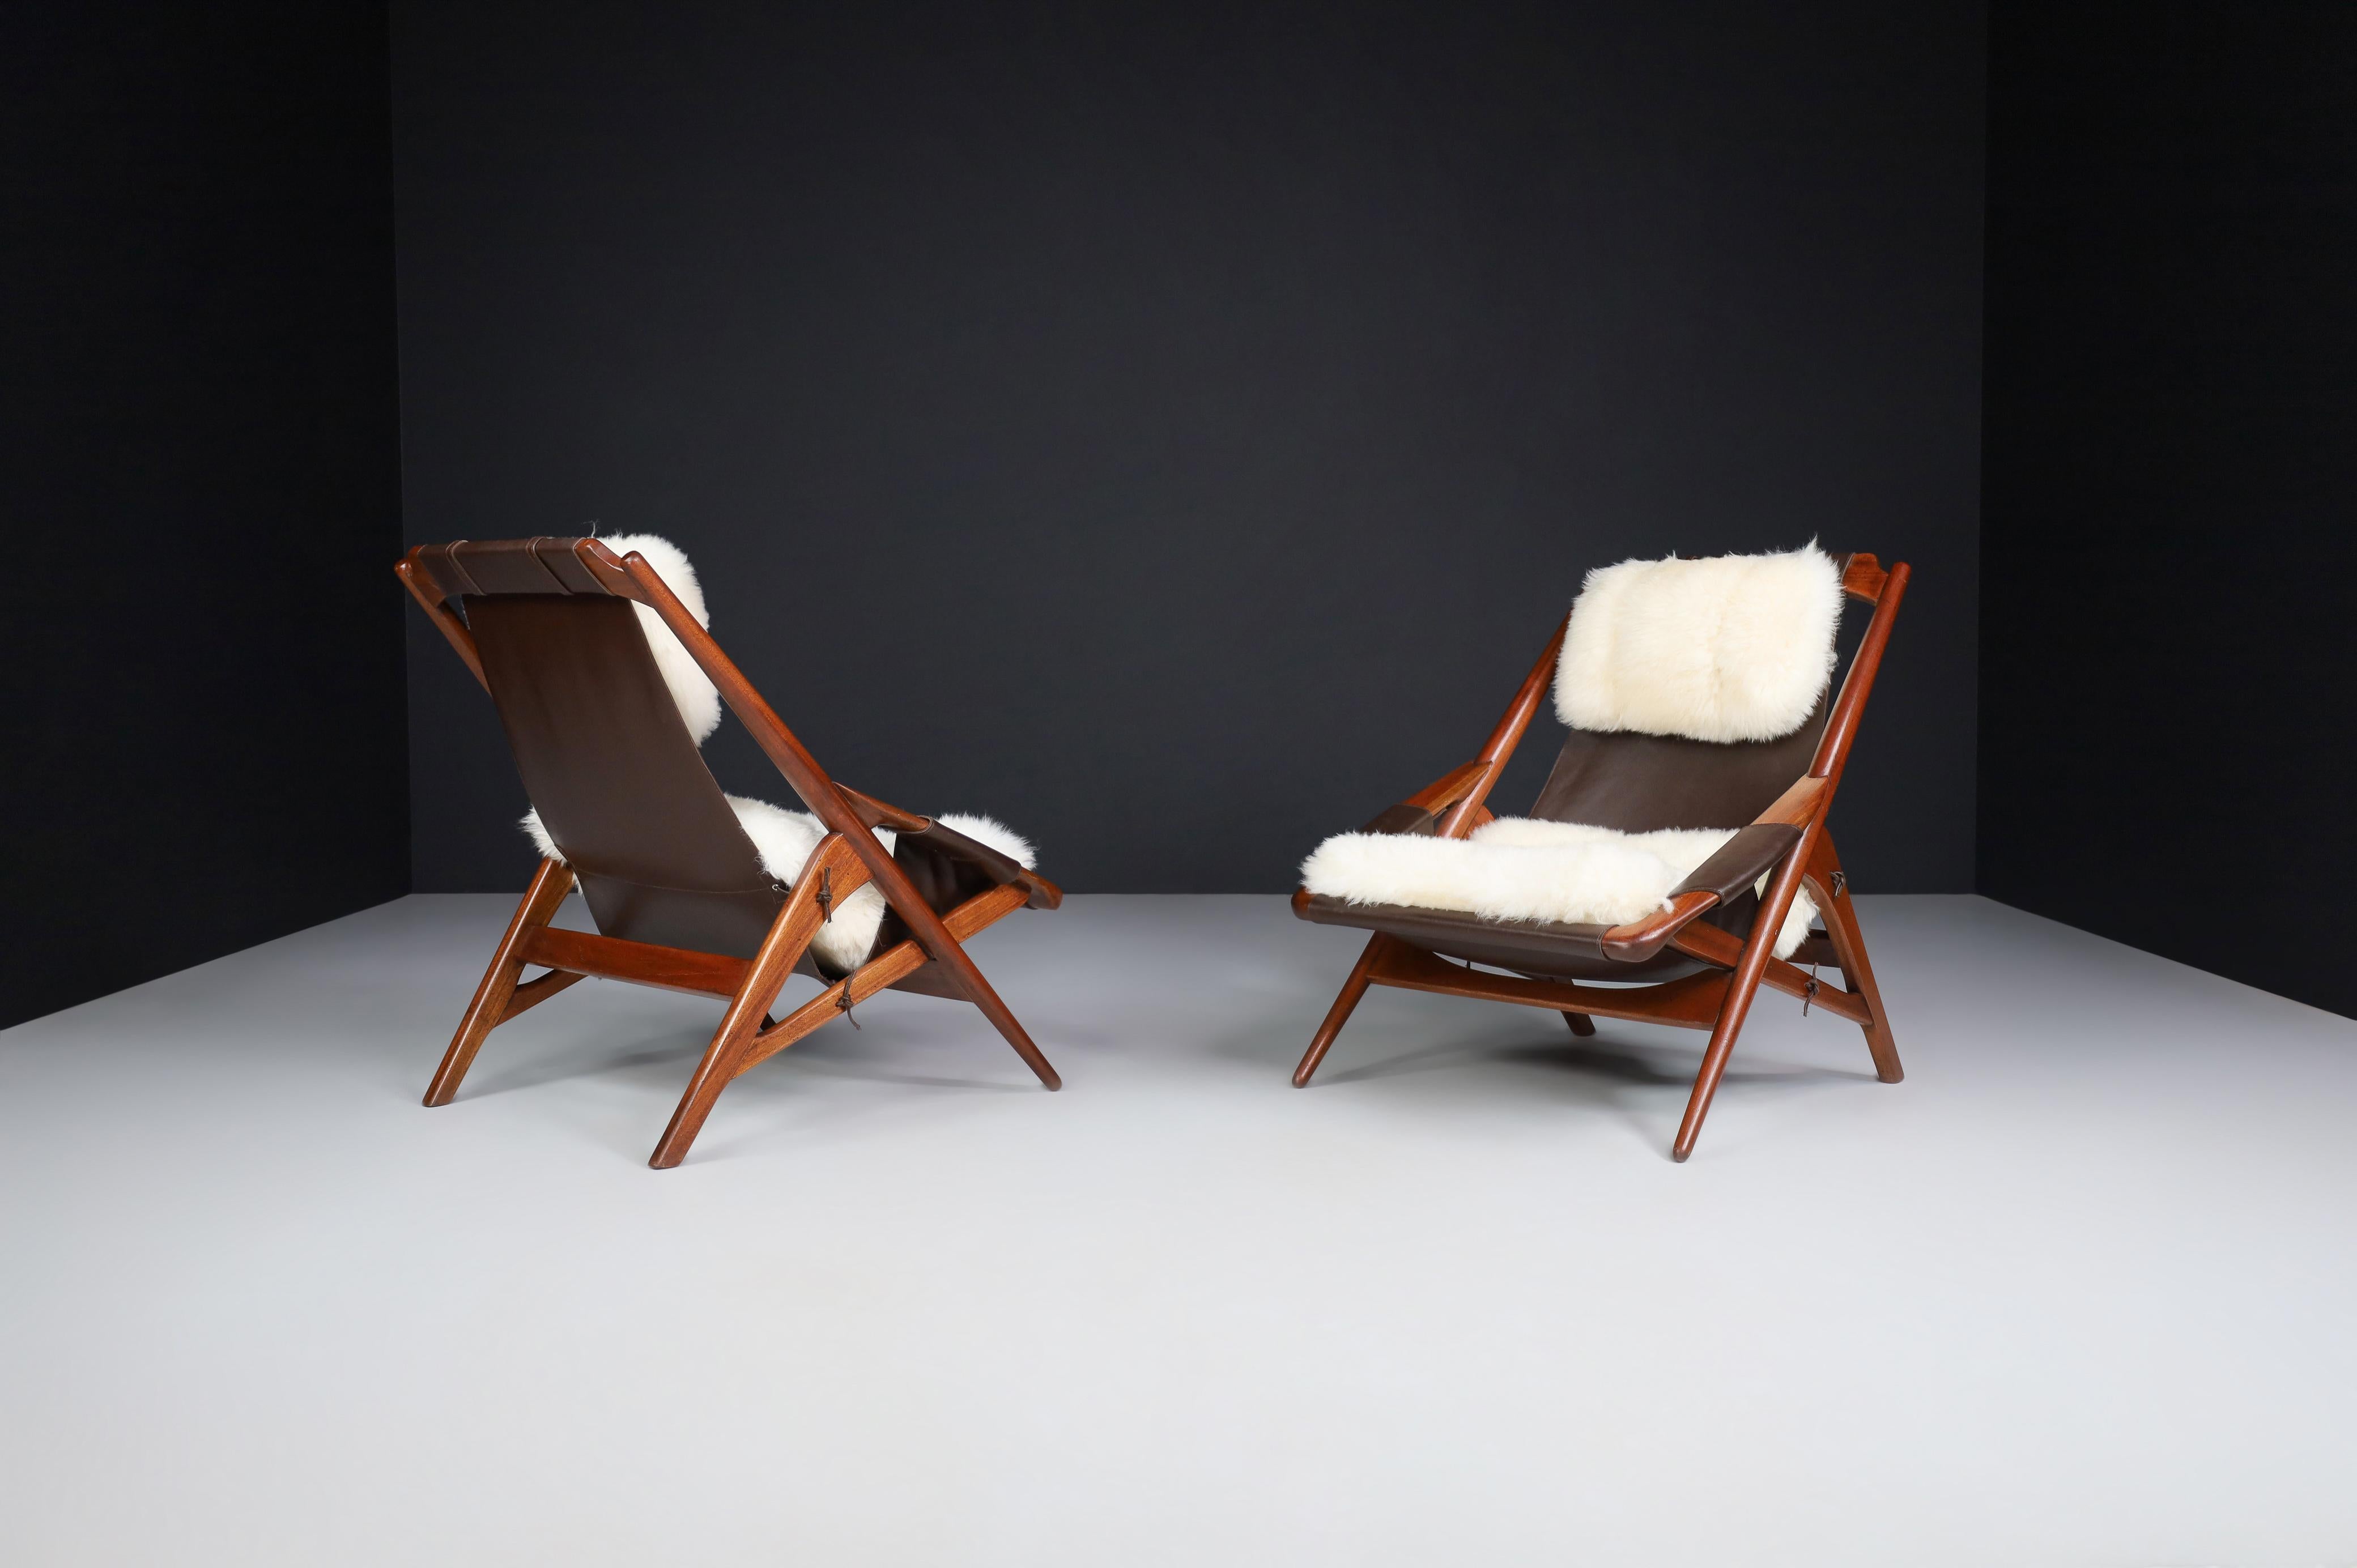 20th Century W.D. Andersag Lounge Chairs Teak and Leather, Italy, 1959 For Sale